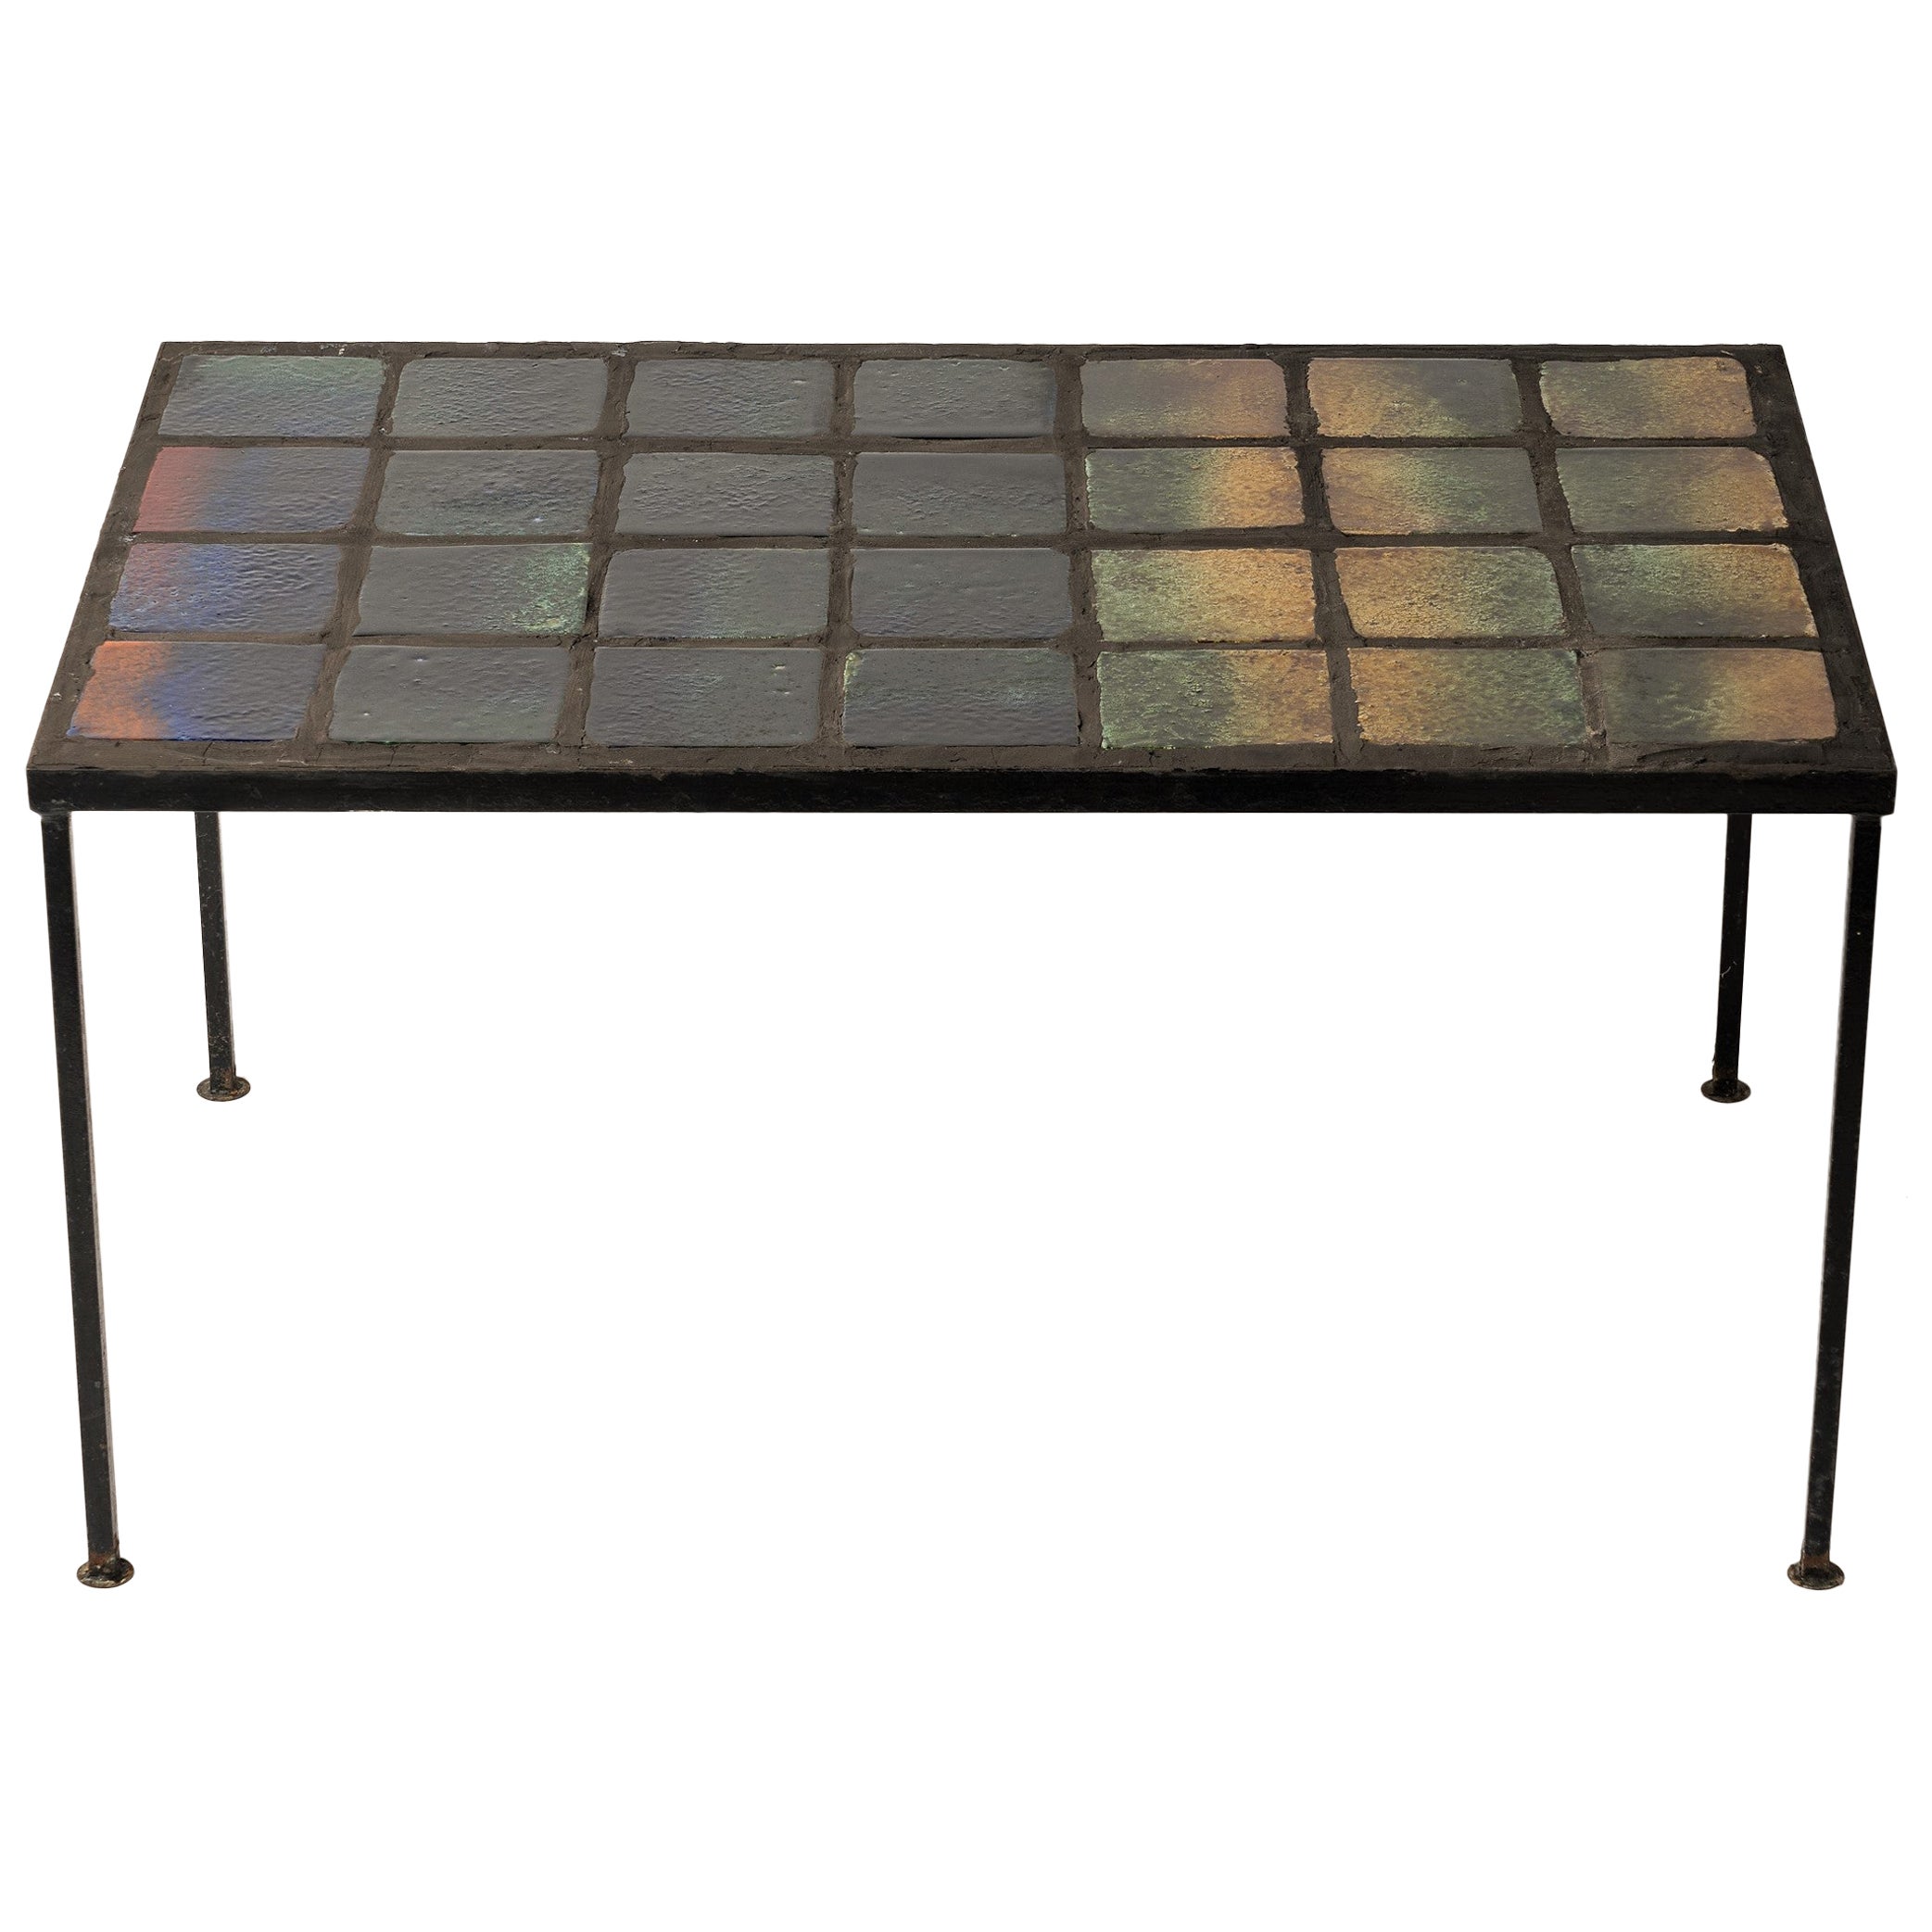 Polychromy Ceramic Tiles Coffee Table in the Style of Cloutier, France, 1960's For Sale